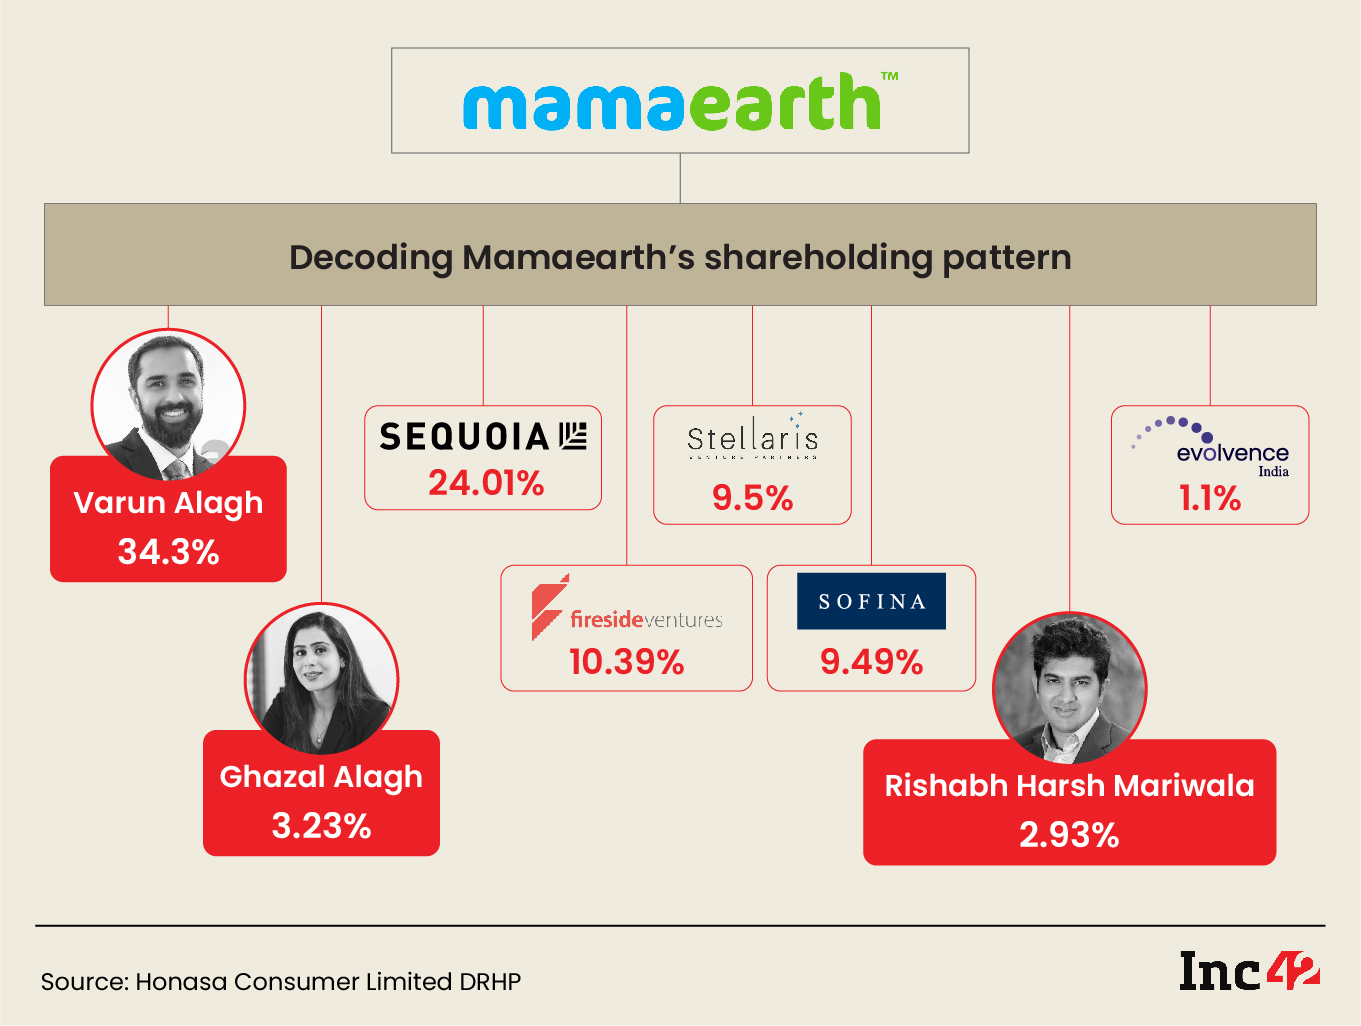 Mamaearth’s Shareholding Pattern